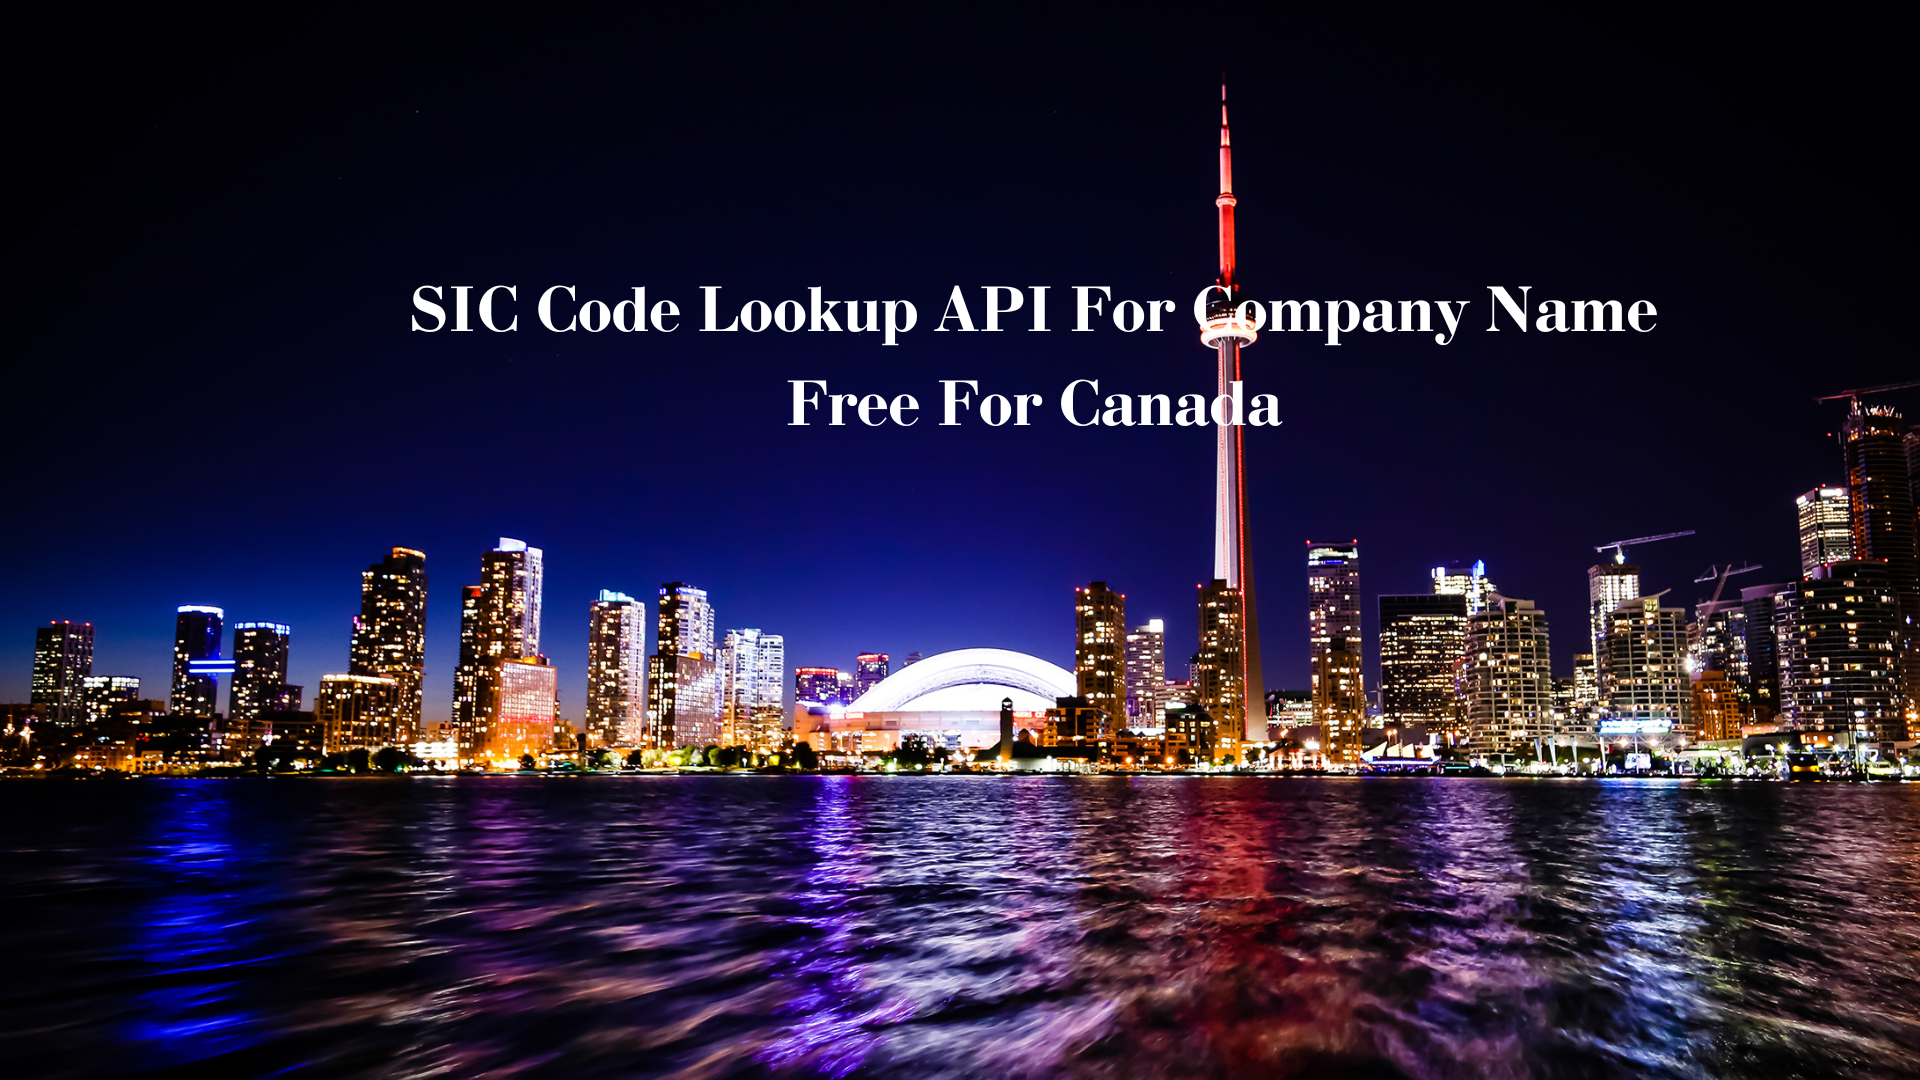 SIC Code Lookup API For Company Name Free For Canada